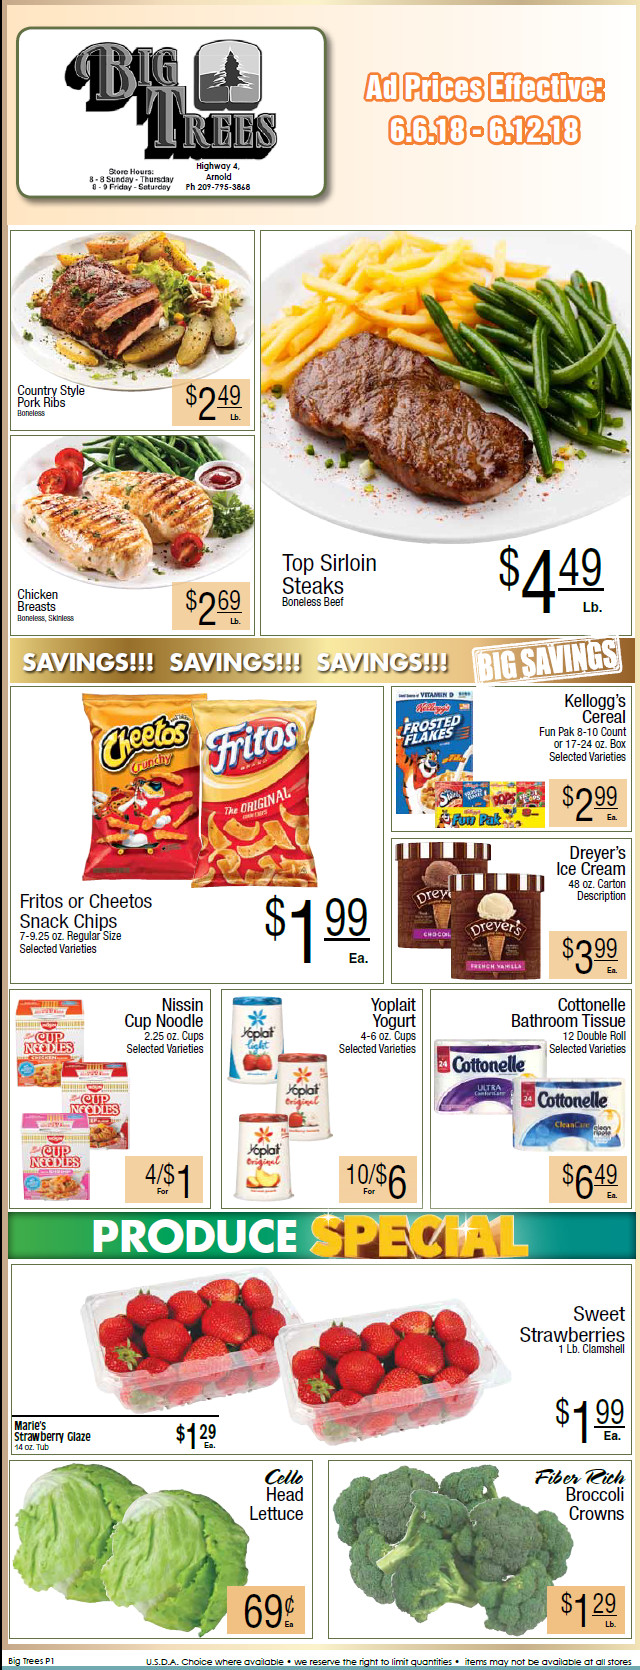 Big Trees Market Weekly Grocery Ad & Specials Through June 12th